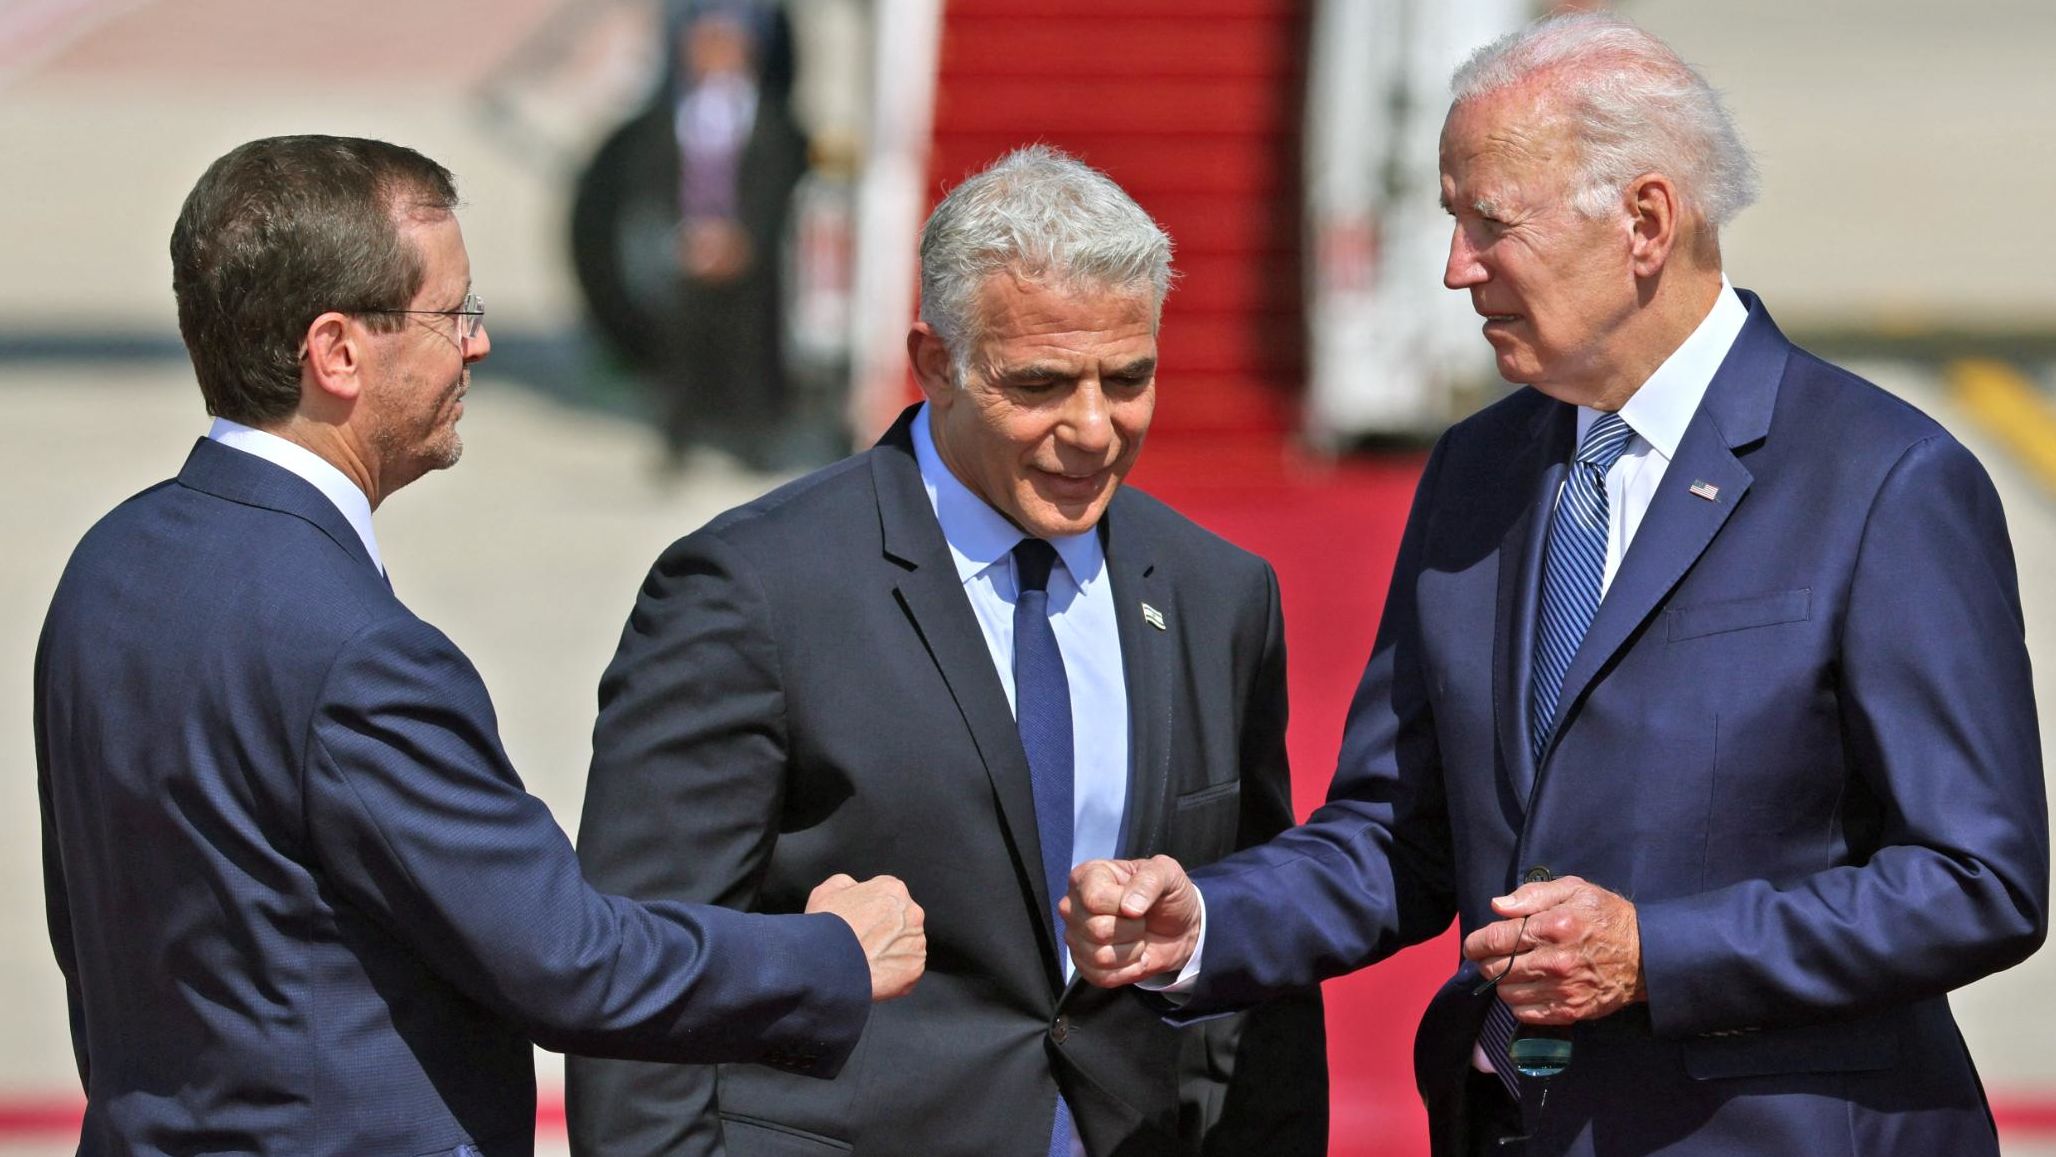 After Air Force One arrived in Israel, Biden was greeted by Lapid and Herzog. The White House said the fist bumps are <a href="https://www.cnn.com/2022/07/13/politics/handshakes-joe-biden-israel/index.html" target="_blank">part of an effort to reduce physical contact</a> amid the rapid spread of a new coronavirus variant. But Biden was later seen shaking hands as well.